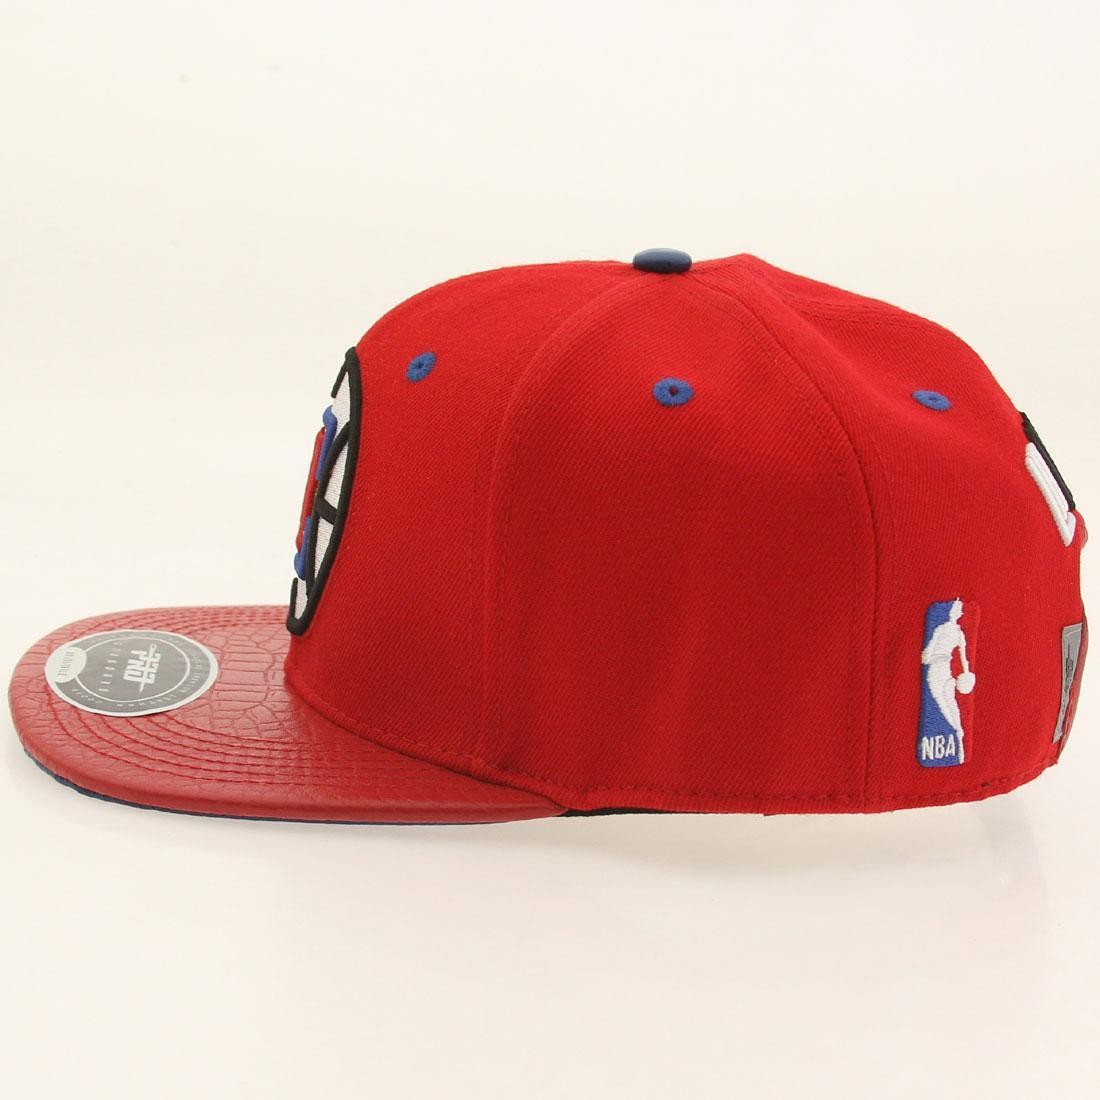 Pro Standard NBA Los Angeles Clippers 2015 Team Logo Adjustable Cap red